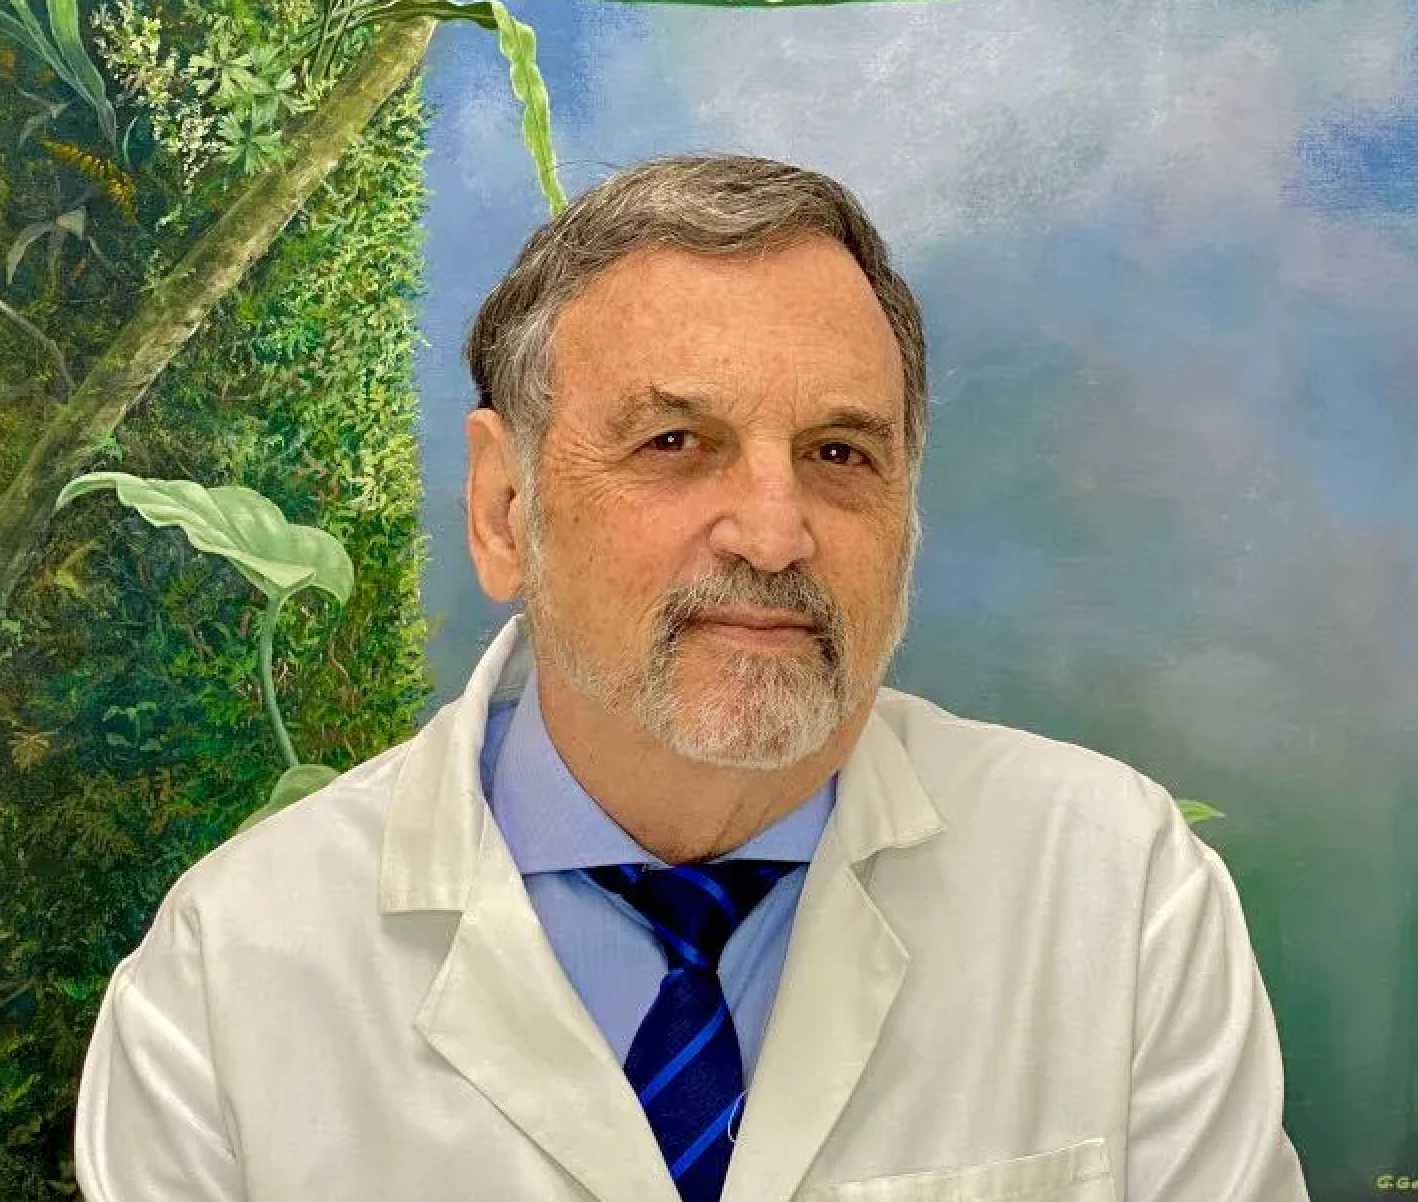 Dr. Peter Aborn